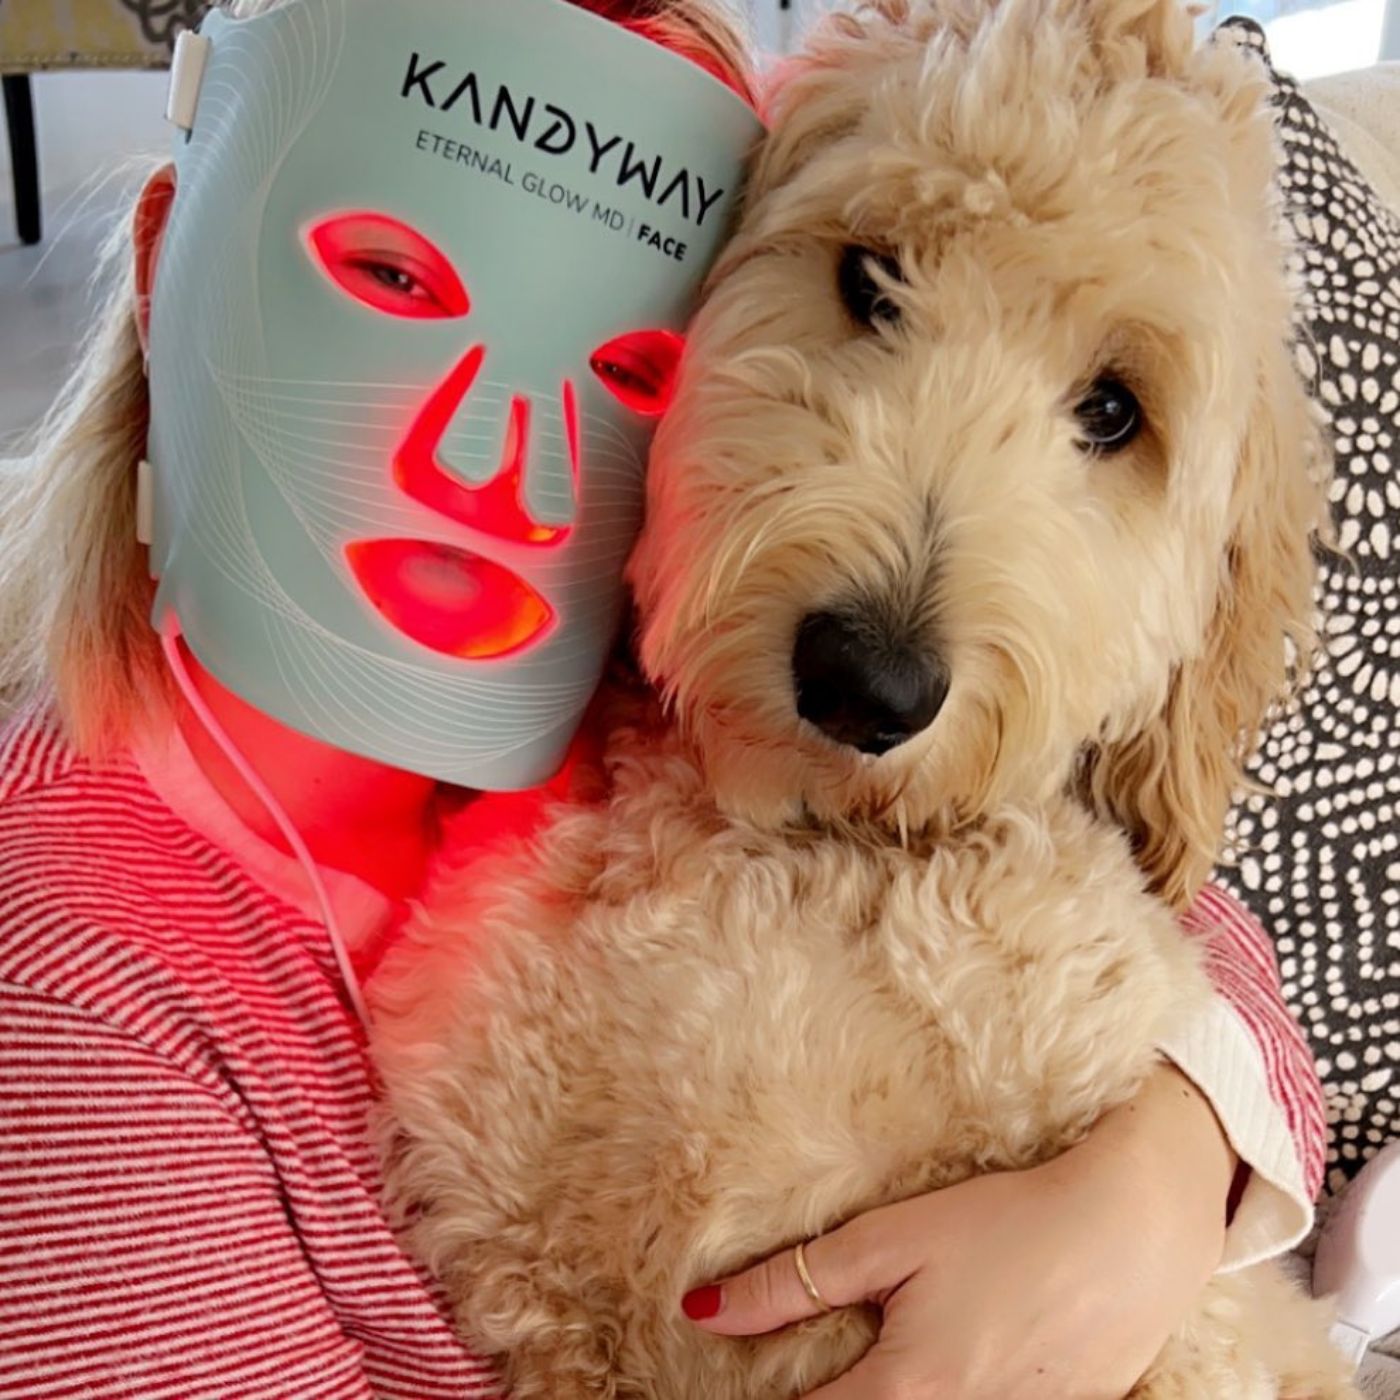 Kandyway Eternal Glow MD with Dog and Red Light Therapy